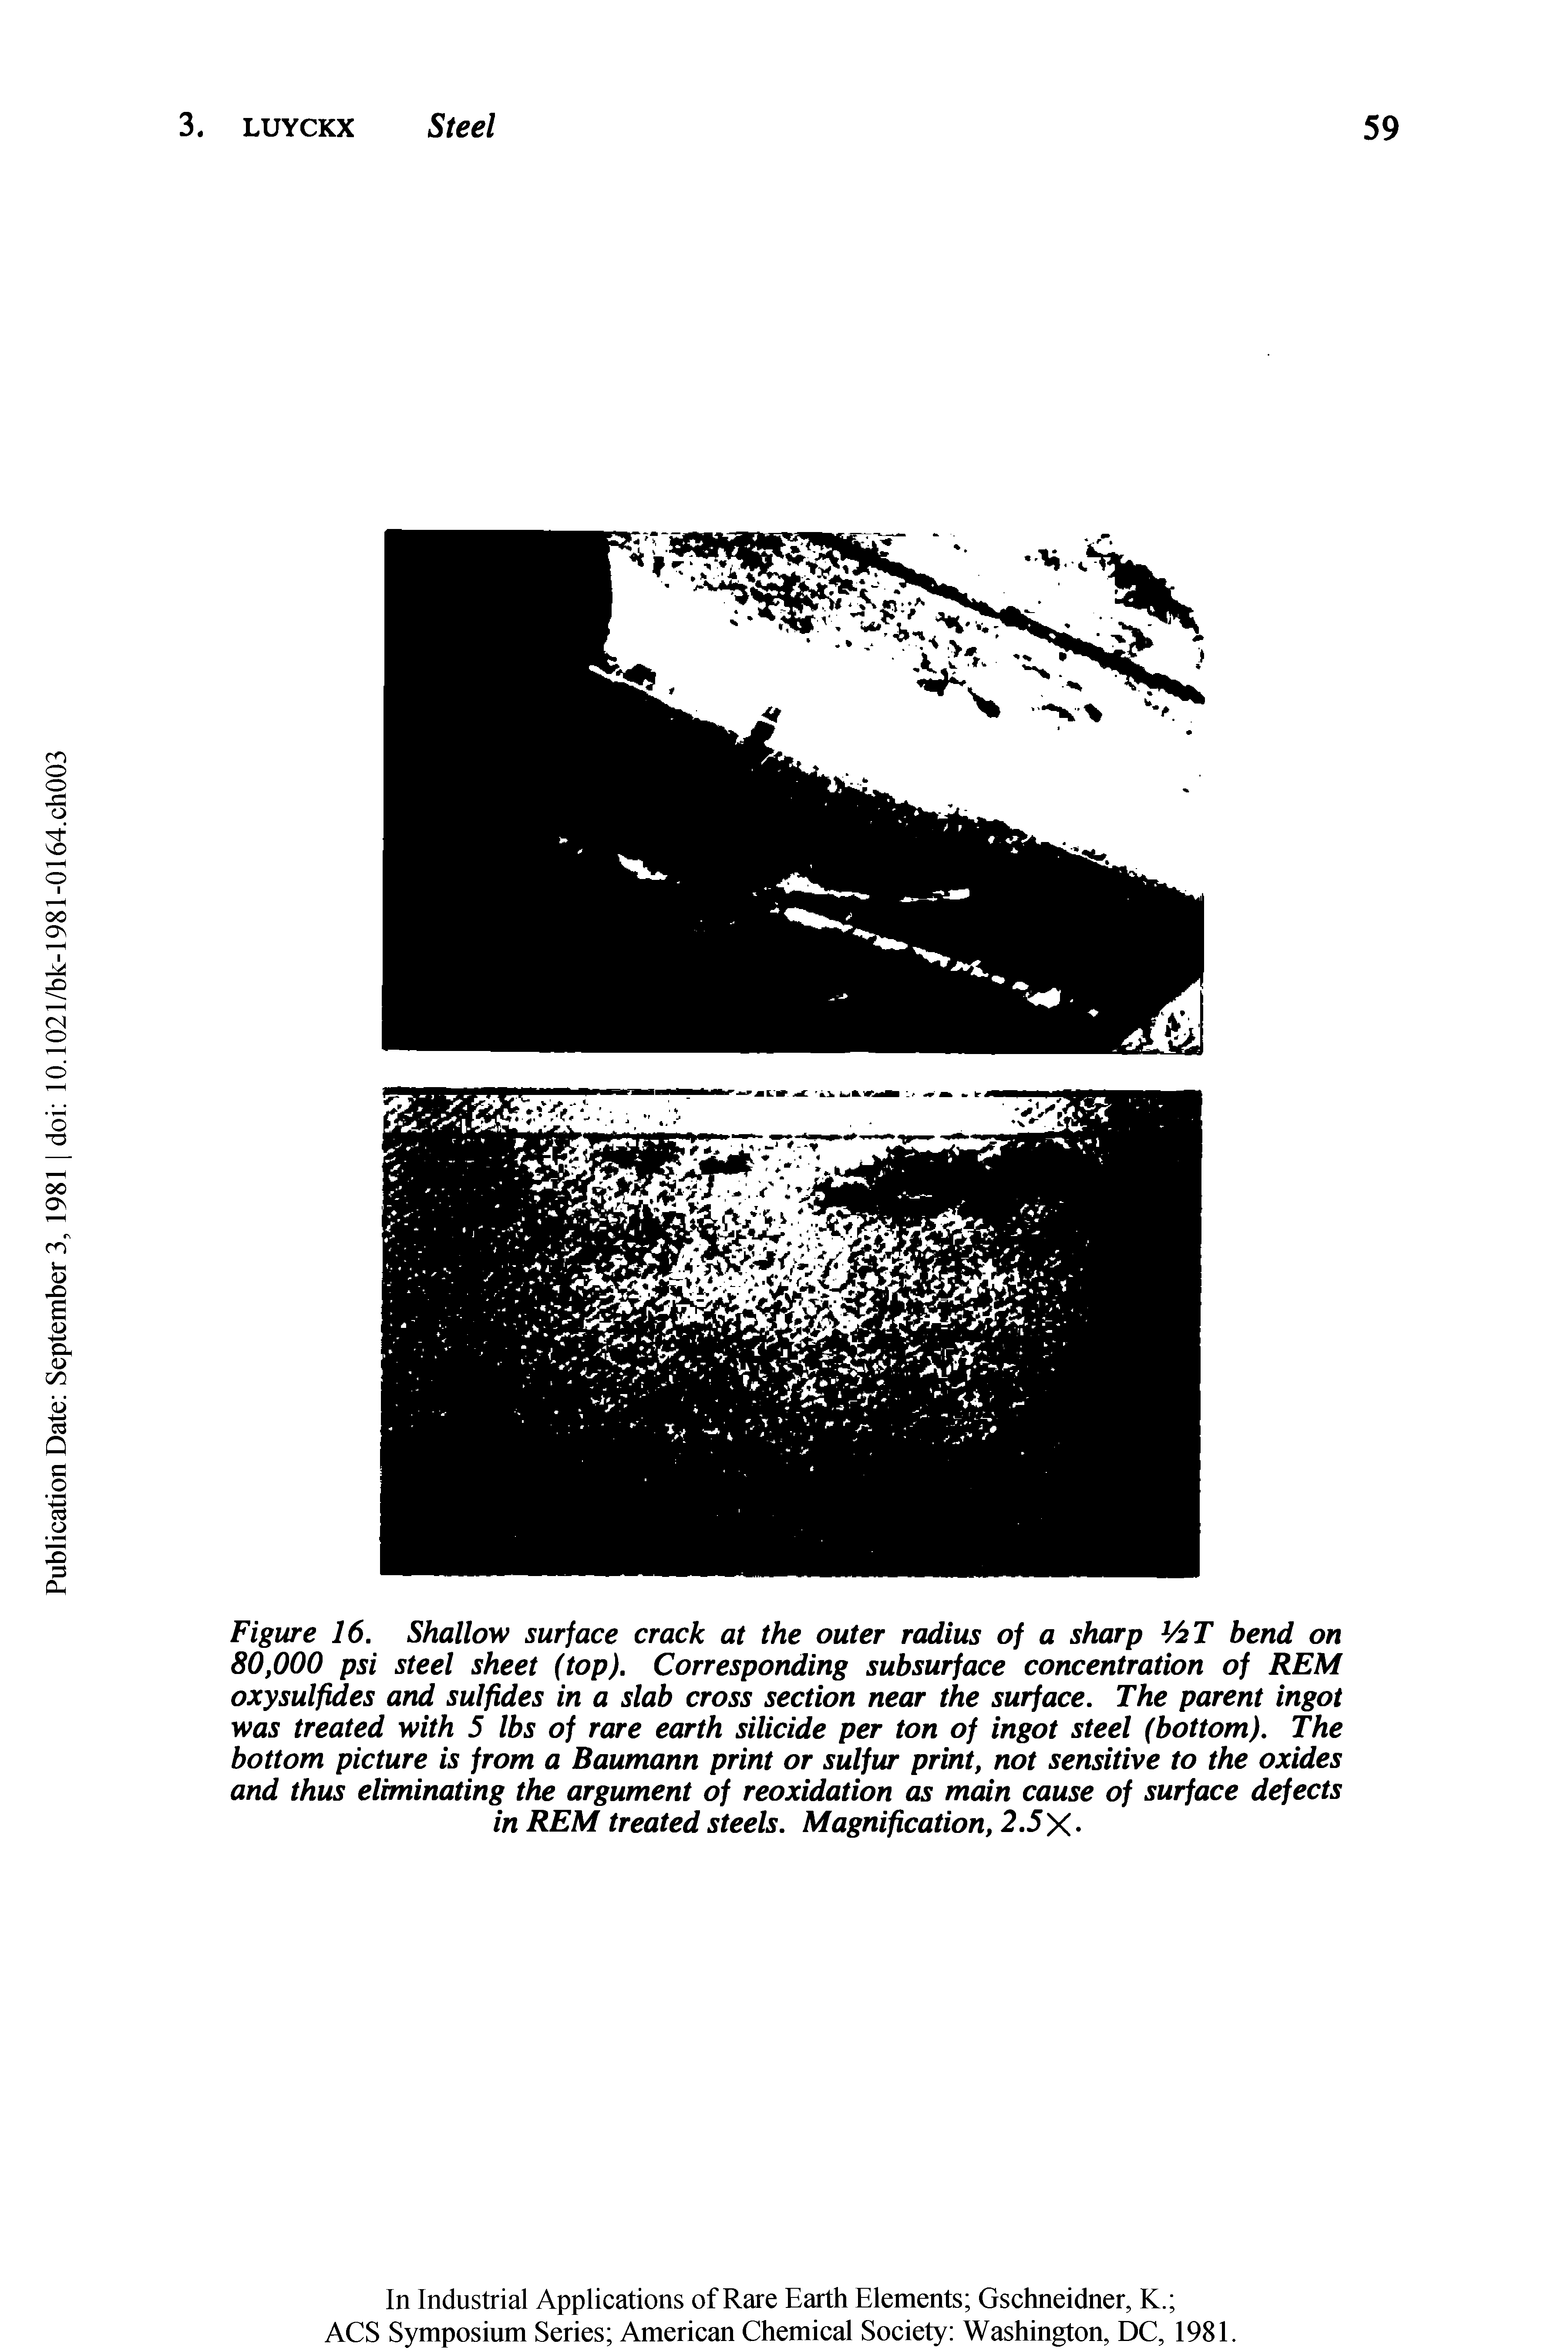 Figure 16. Shallow surface crack at the outer radius of a sharp V2T bend on 80,000 psi steel sheet (top). Corresponding subsurface concentration of REM oxysulfides and sulfides in a slab cross section near the surface. The parent ingot was treated with 5 lbs of rare earth silicide per ton of ingot steel (bottom). The bottom picture is from a Baumann print or sulfur print, not sensitive to the oxides and thus eliminating the argument of reoxidation as main cause of surface defects in REM treated steels. Magnification, 2.5X-...